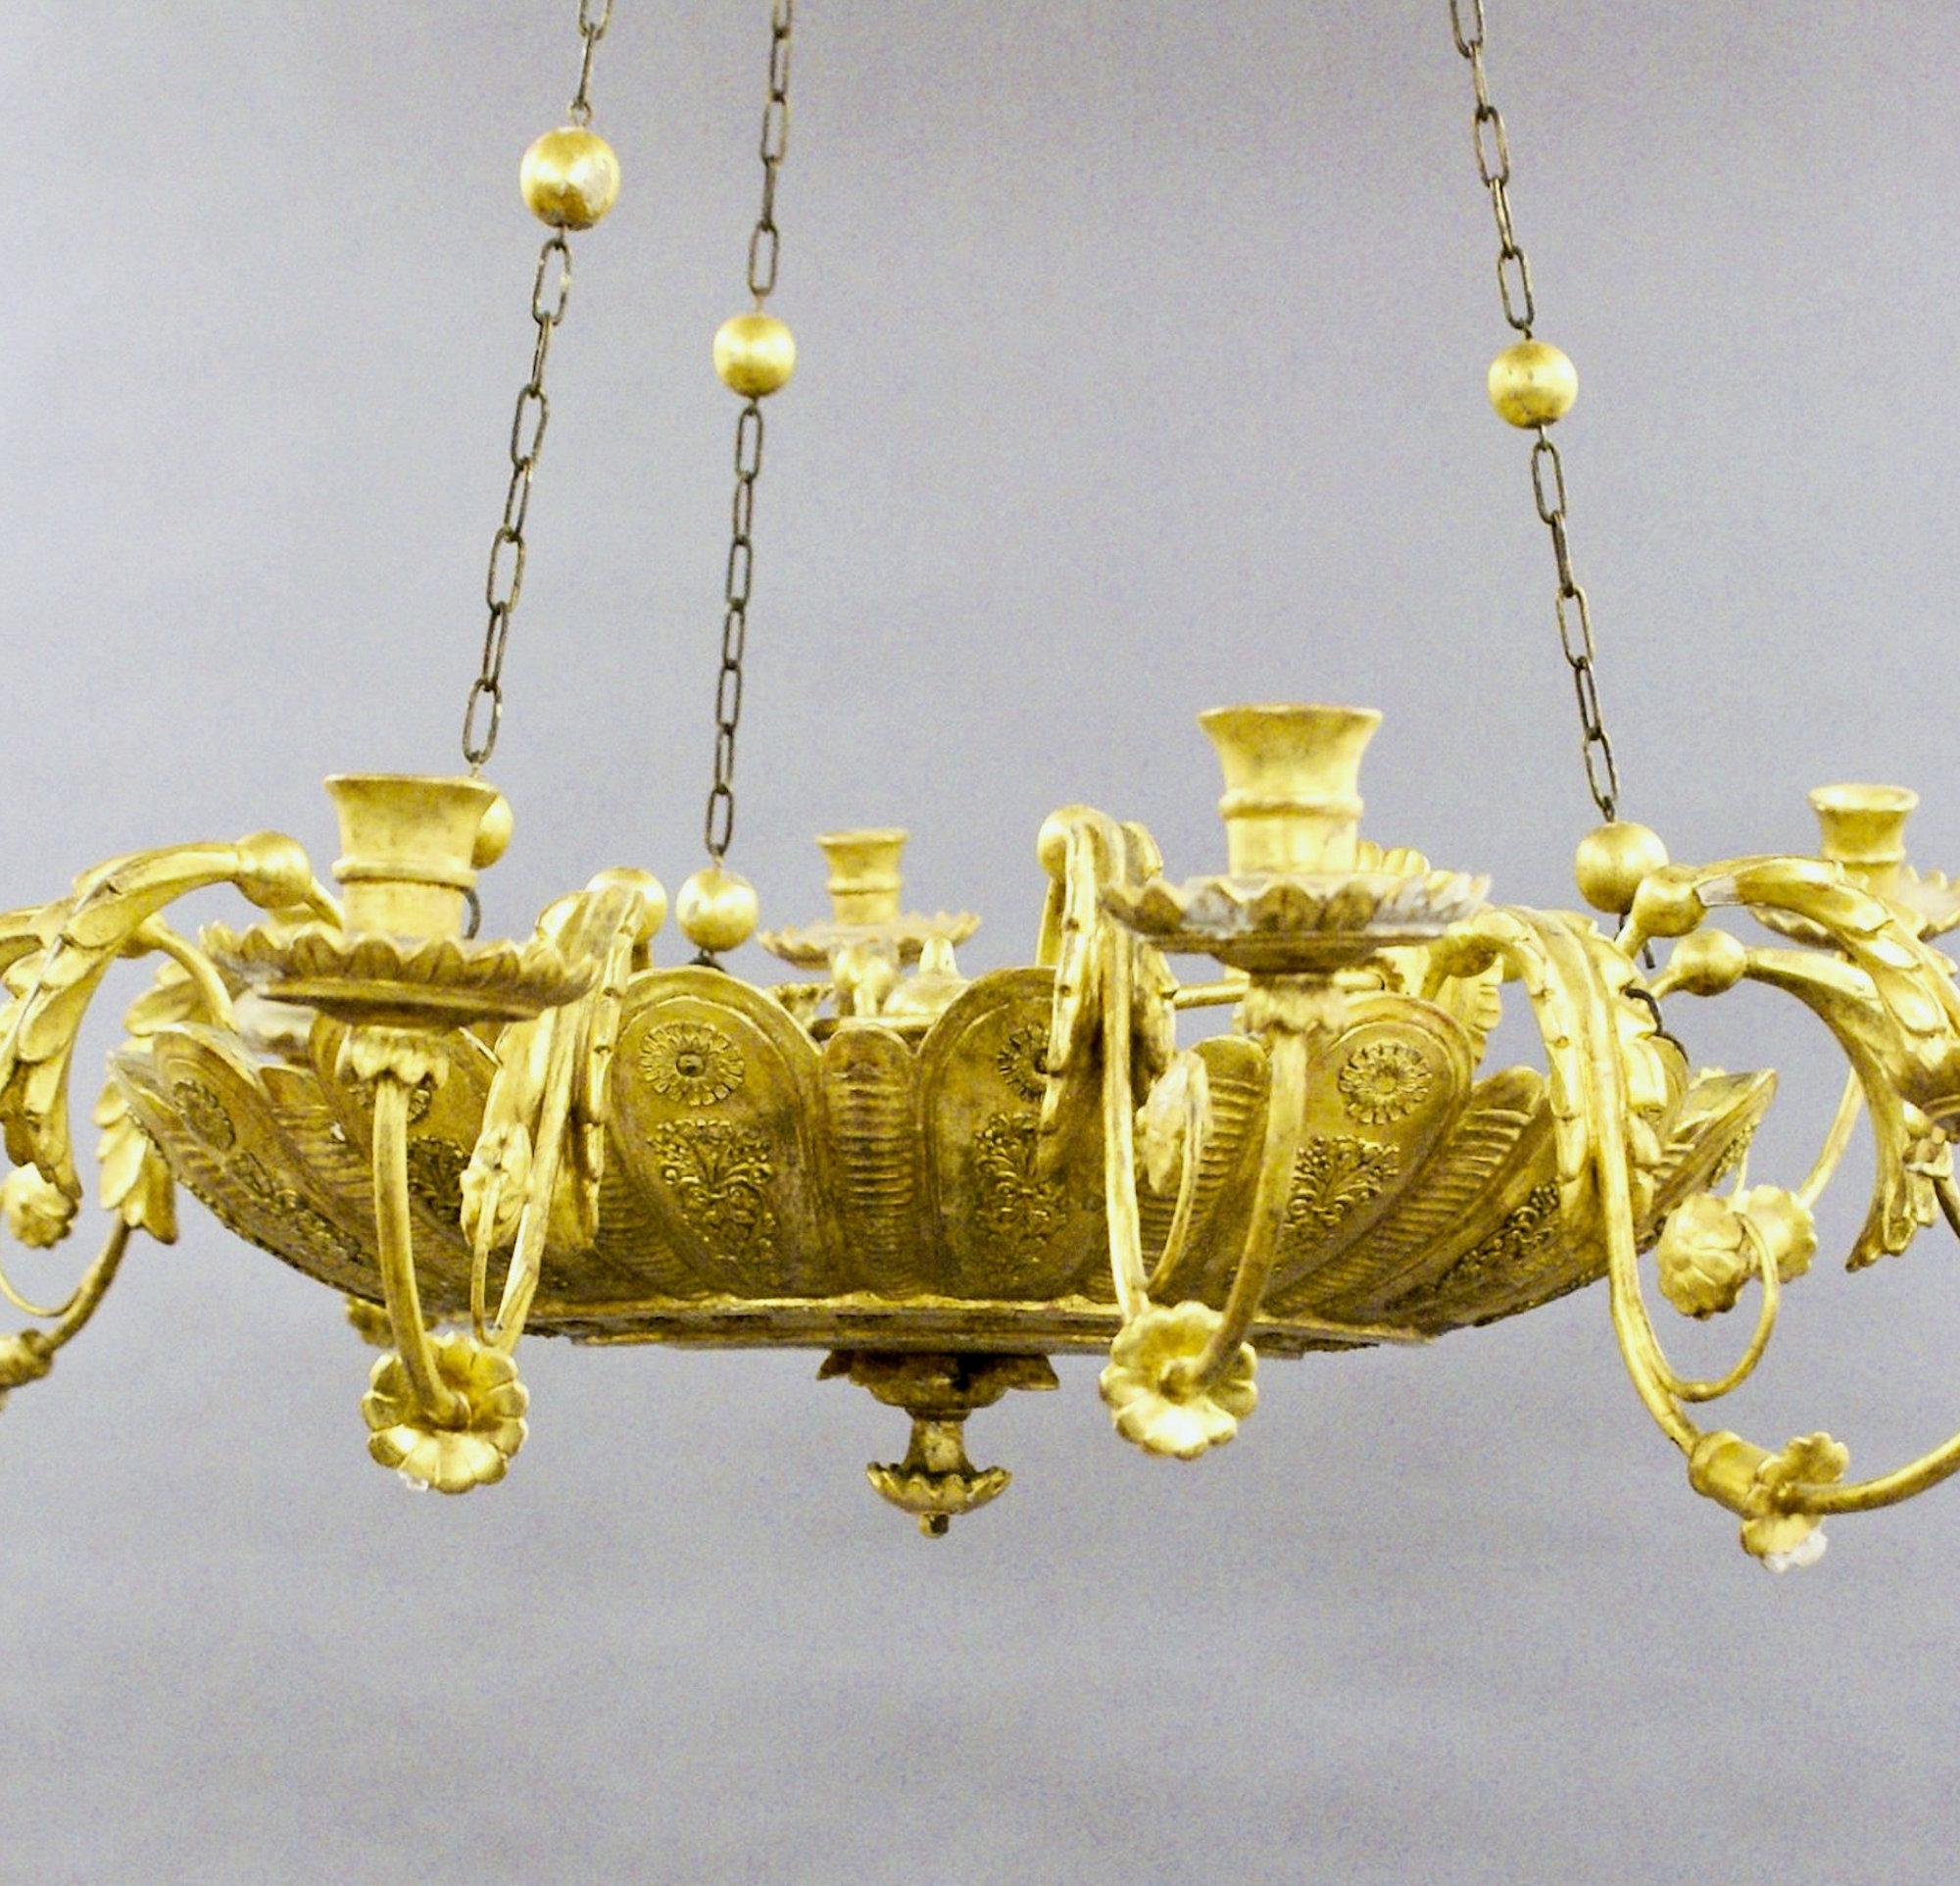 This stunning and beautifully crafted late 18th century giltwood chandelier features 10 shaped branches and scones, all ornately carved and embellished. The branches all connect to a central dish center with the original canopy and chains. The